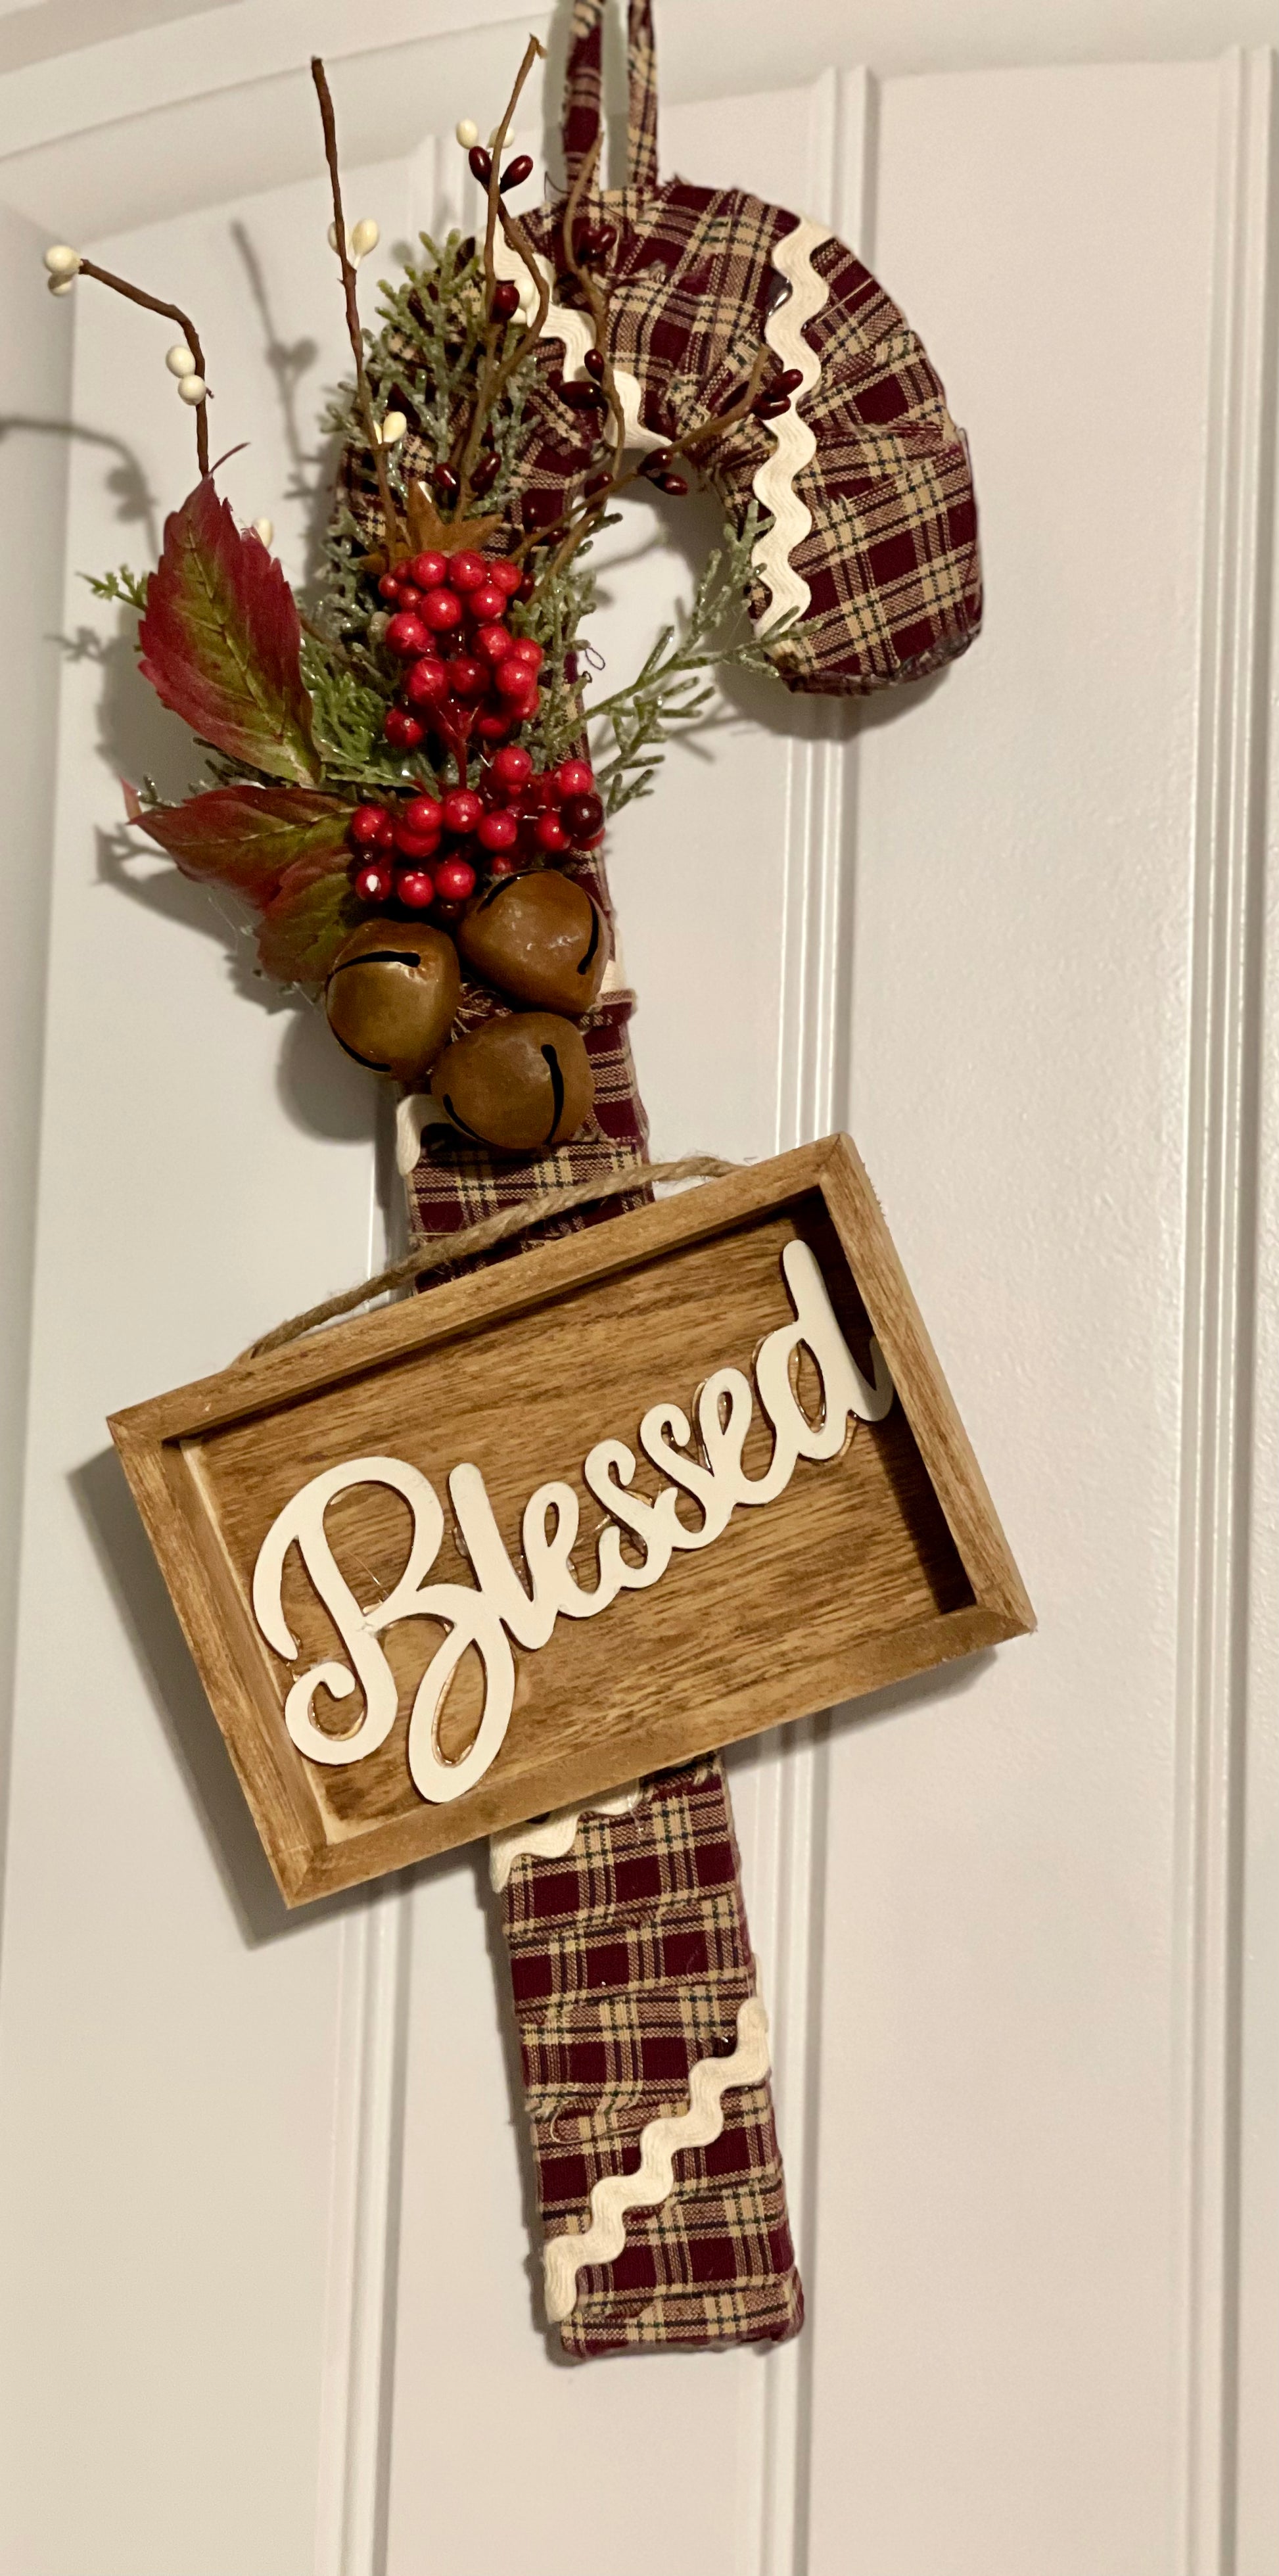 Blessed candy cane - Heart Land Designs